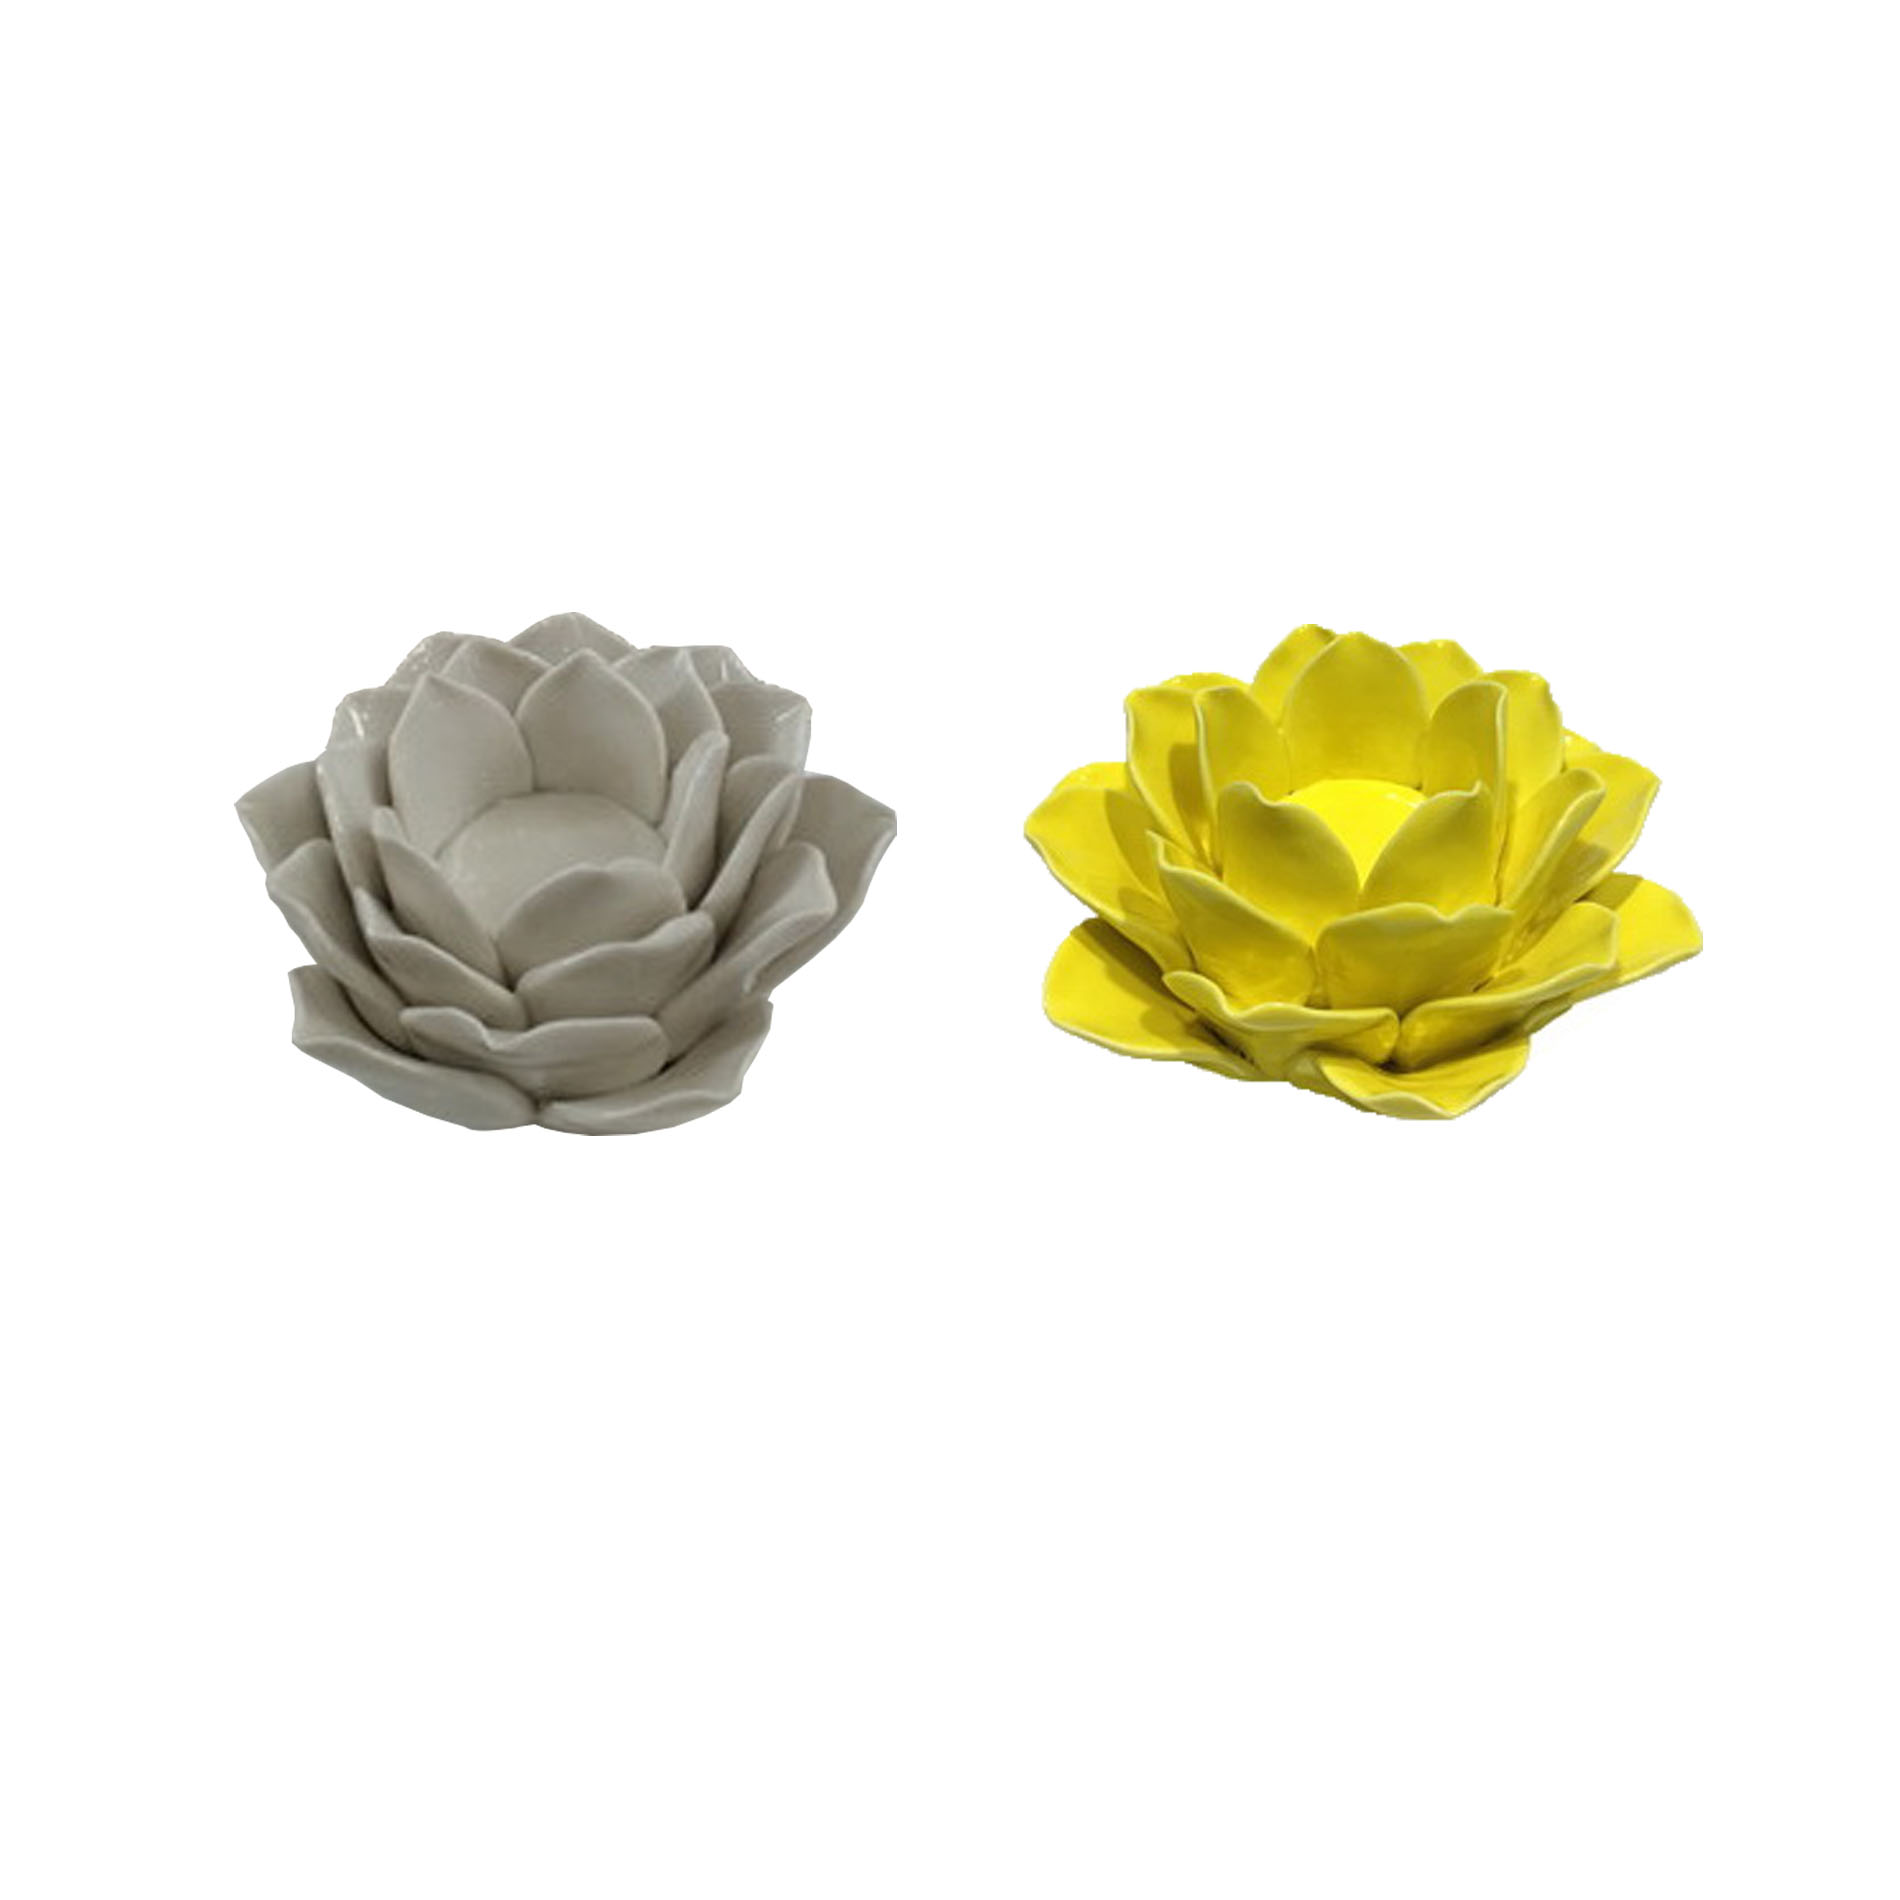 Sutton Rowe Ceramic Lotus - Yellow *Limited Availability